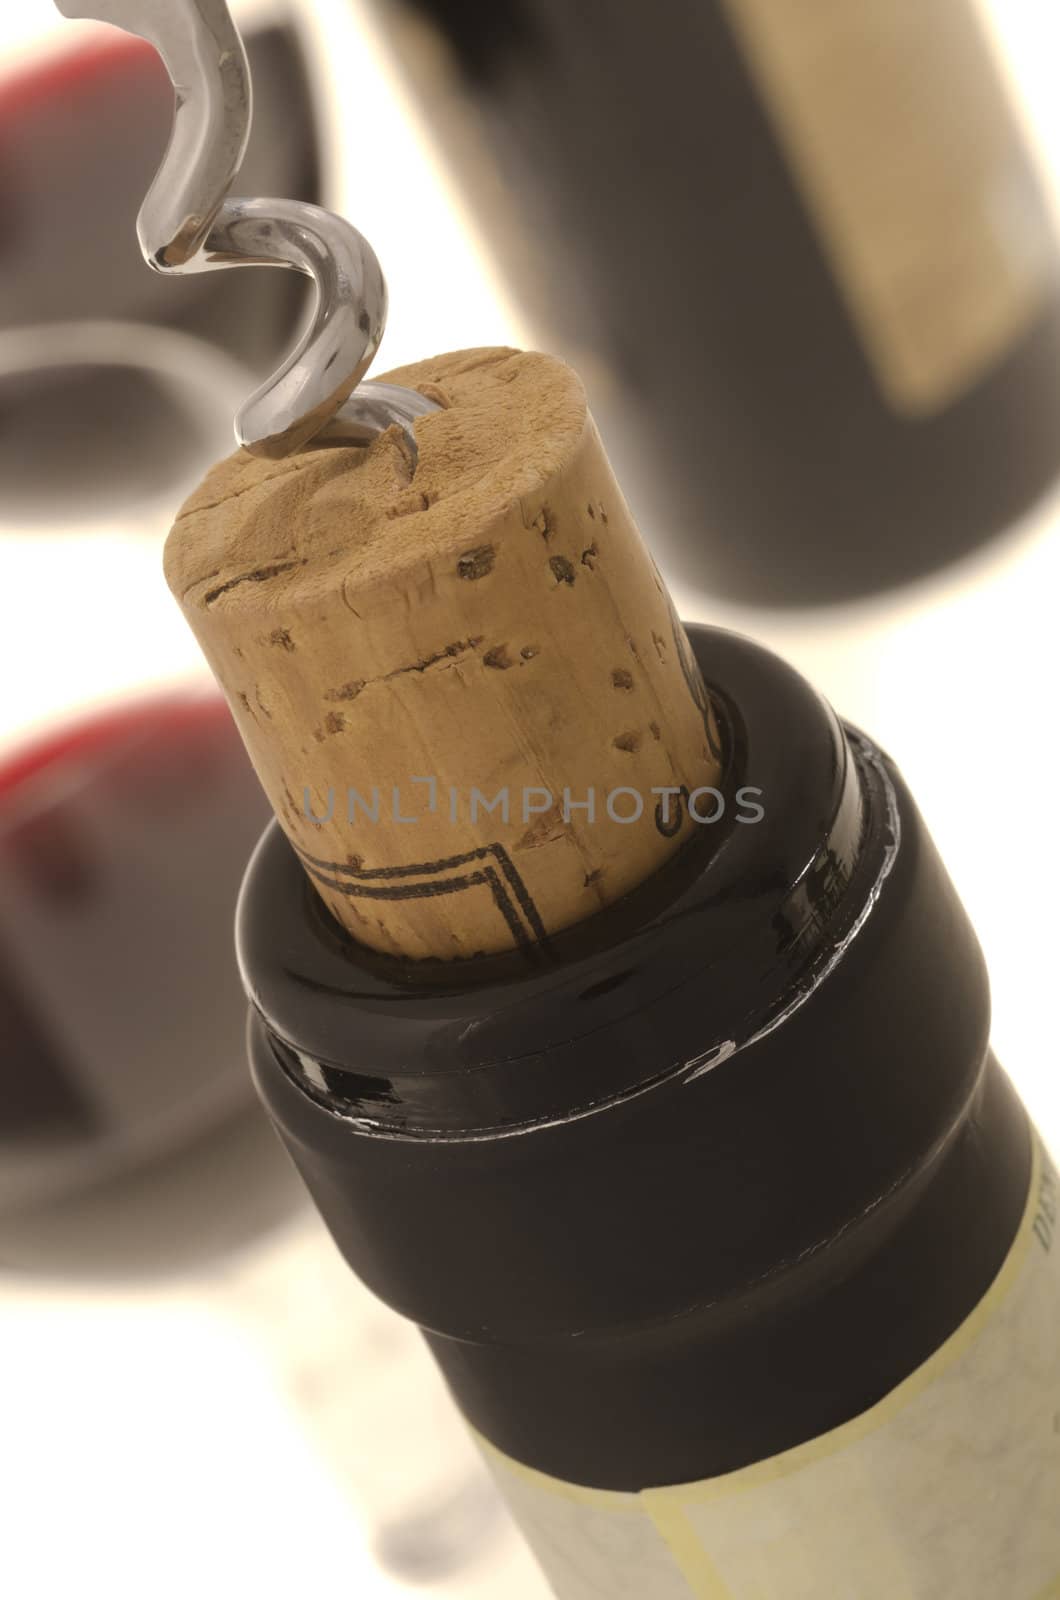 Opening a wine bottle and two wine glasses at background.(Shallow DOF)